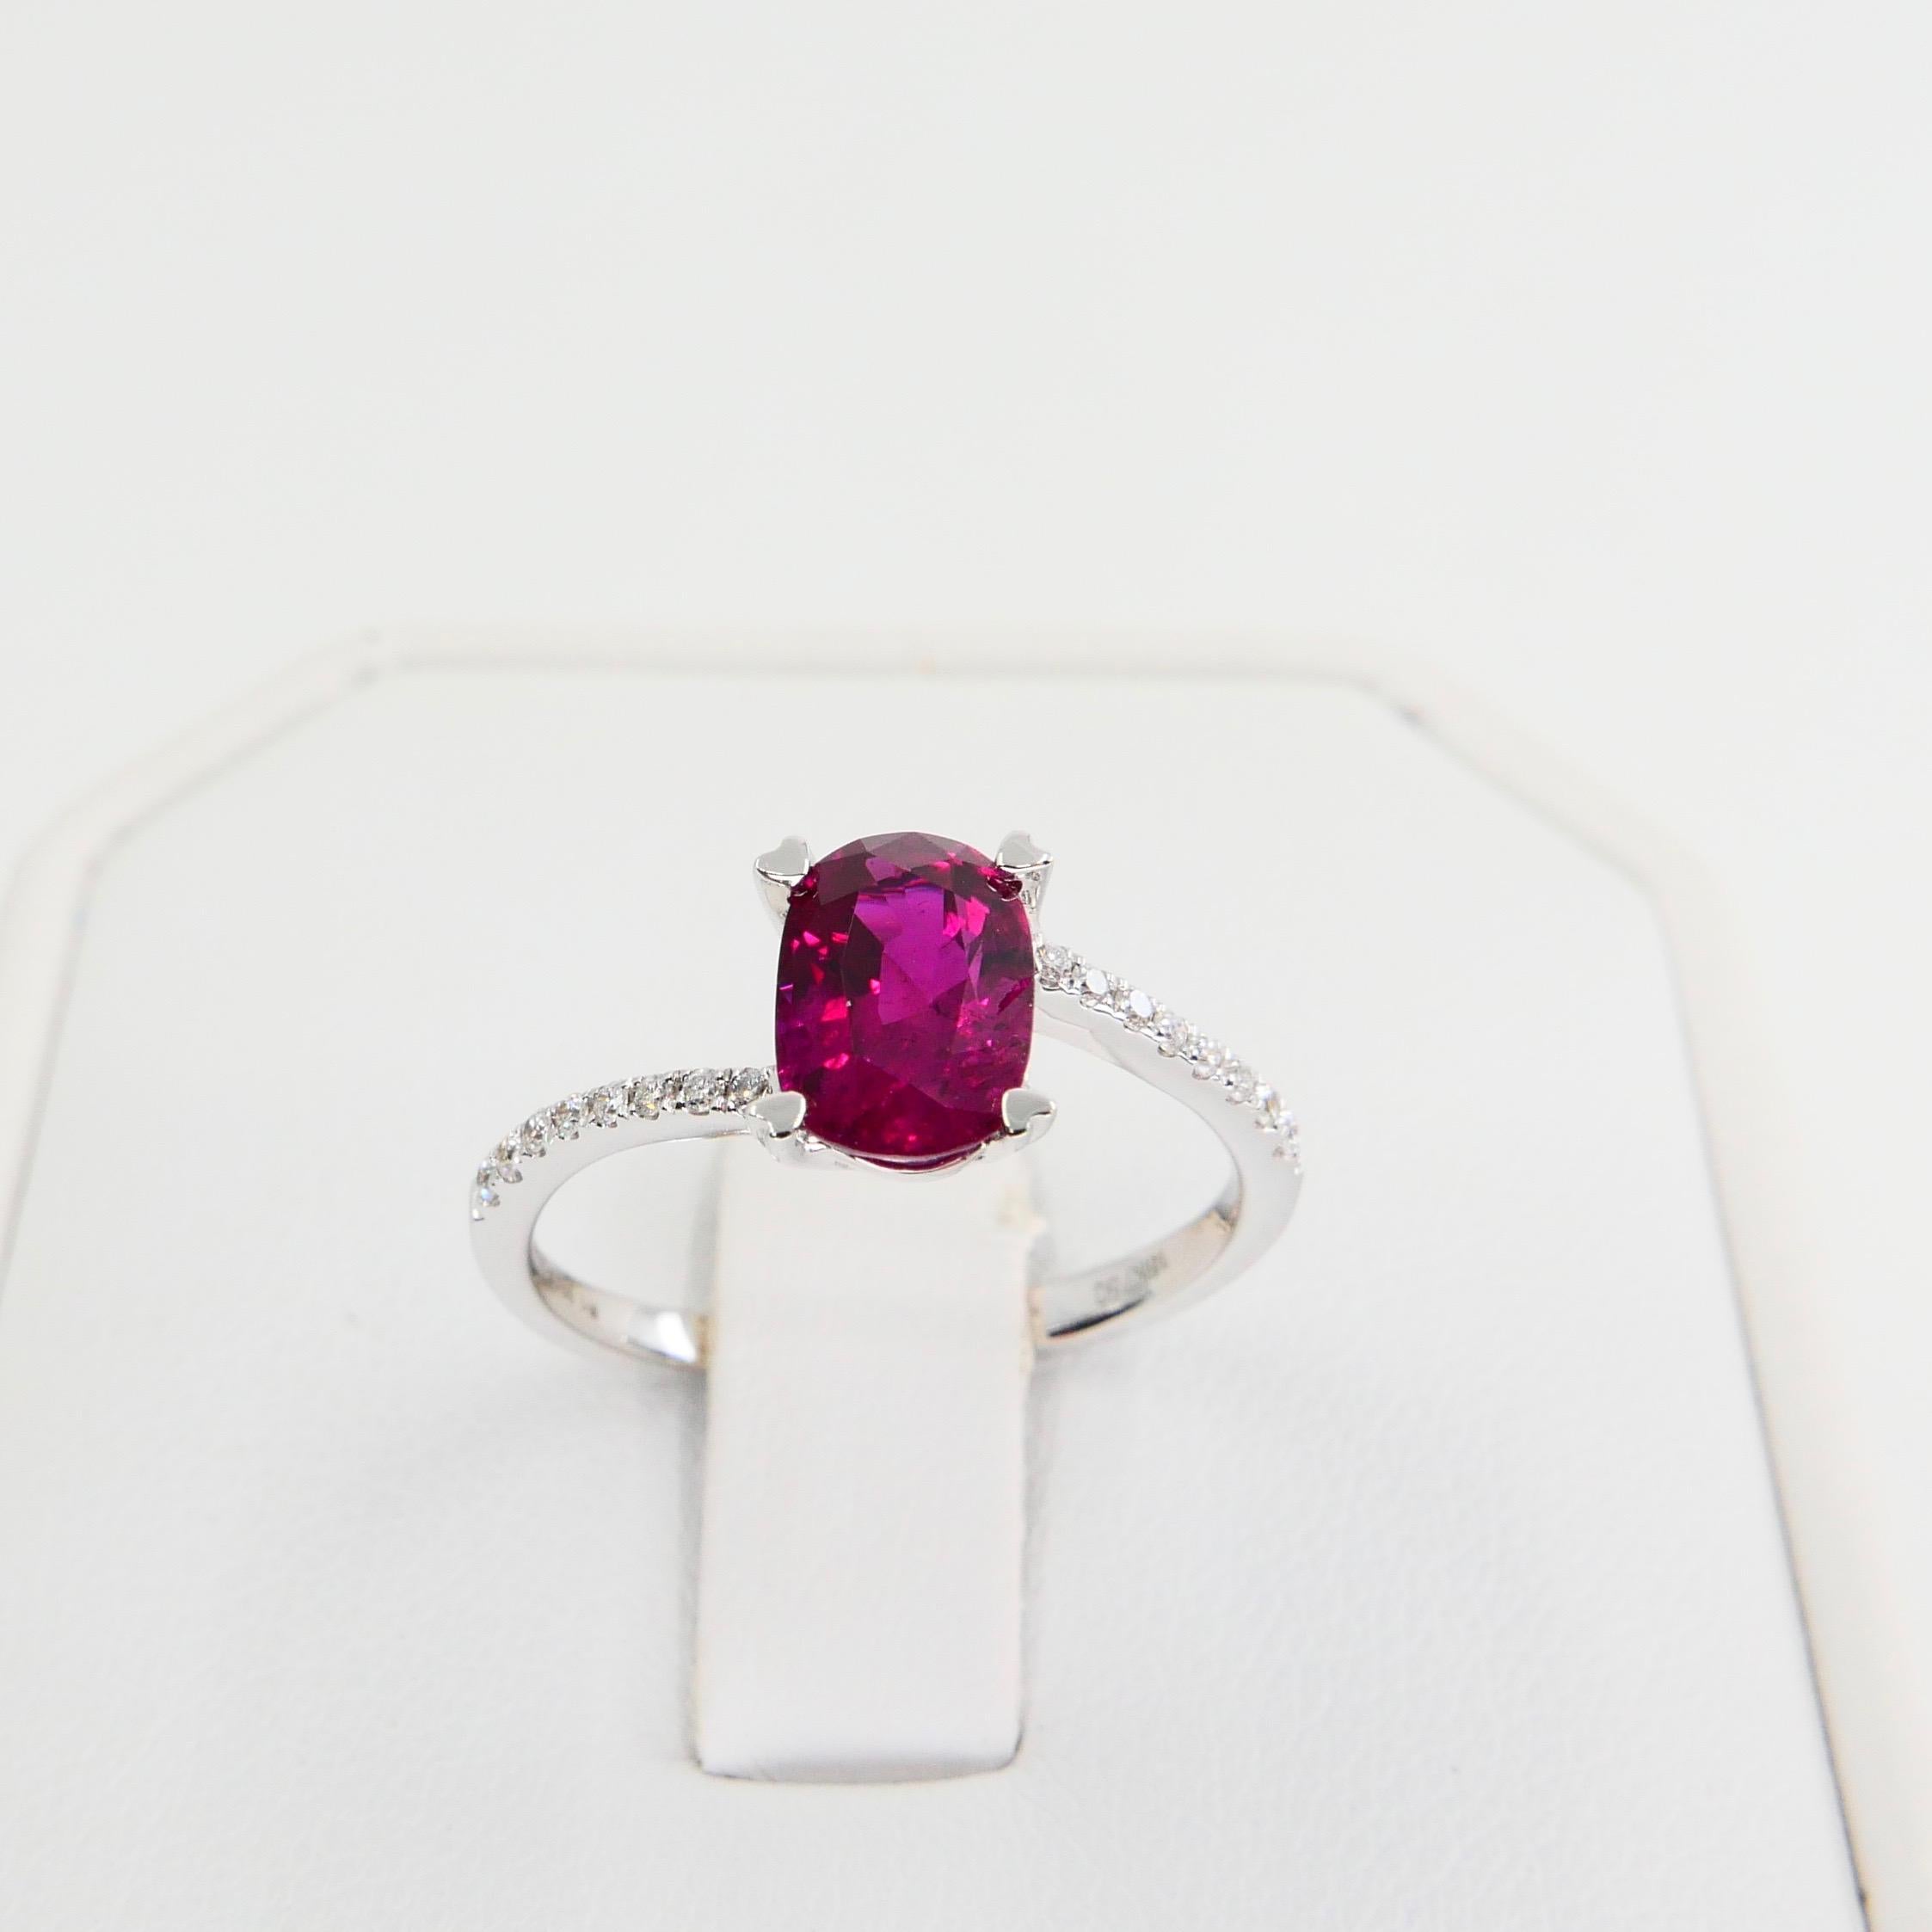 Contemporary Burma Ruby 1.39 Carat and Diamond Ring, 18 Karat Gold, Heart Shaped Prongs For Sale